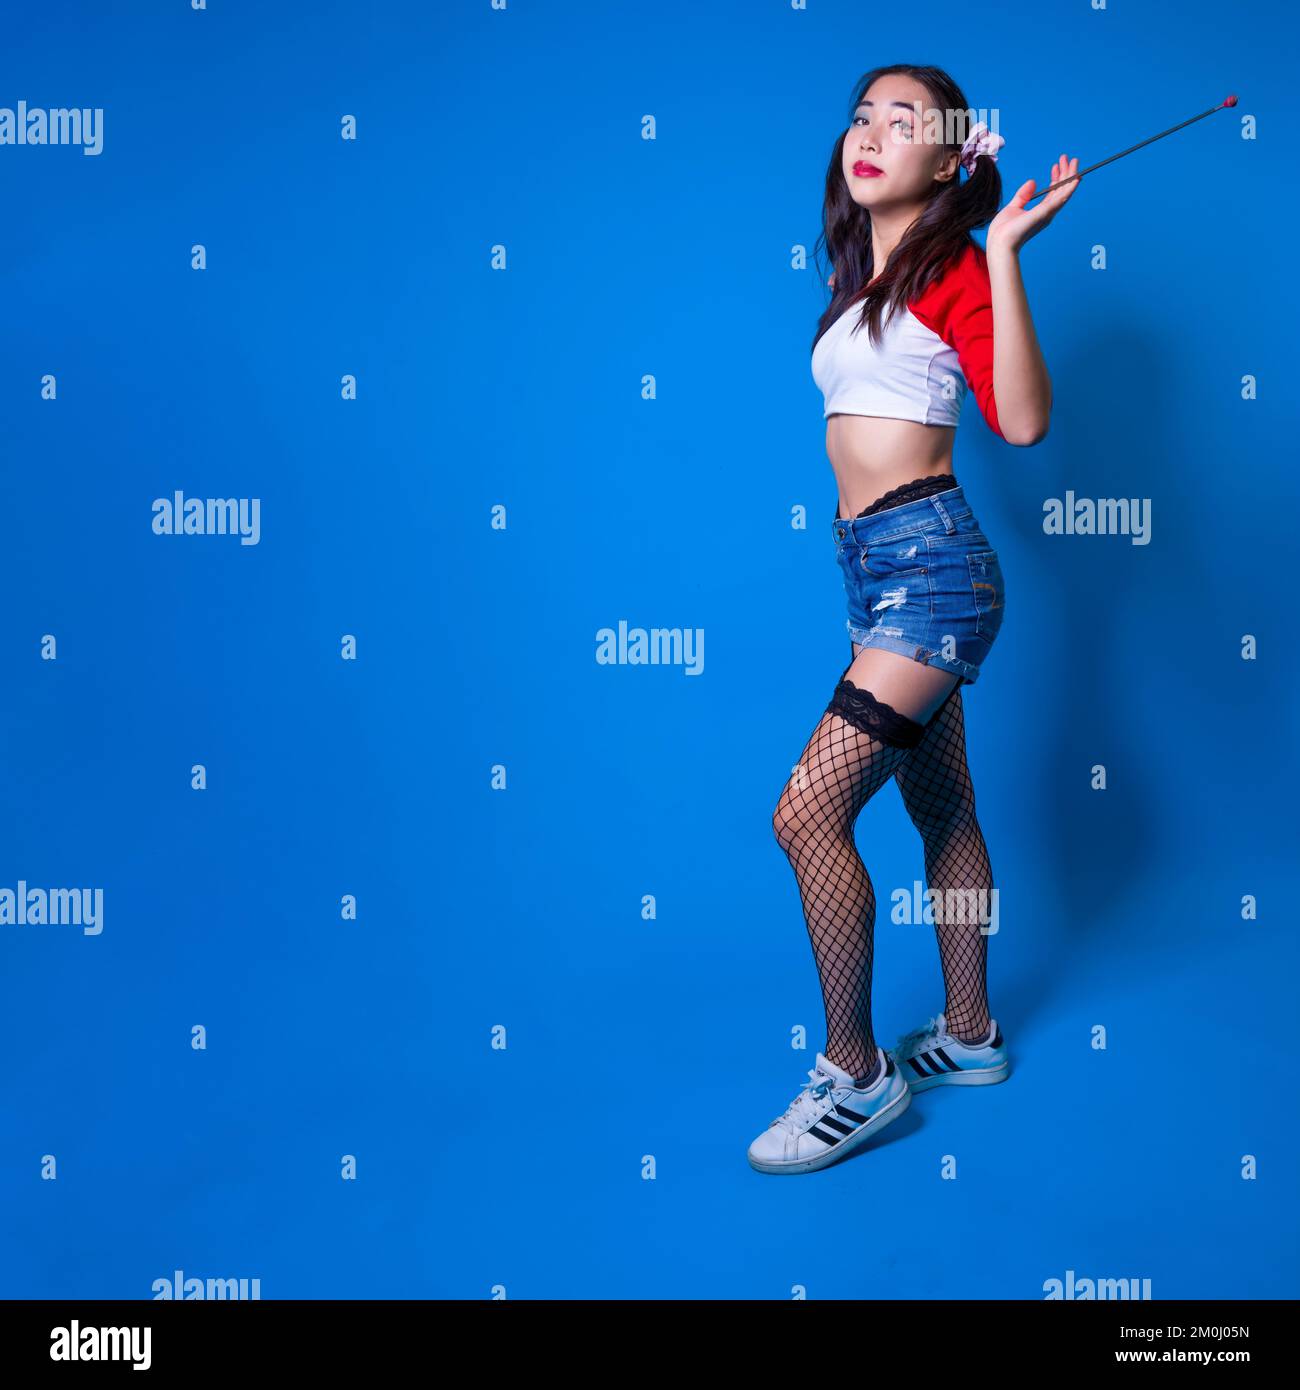 Young Woman in Harlequin Costume Holding Fencing Foil Against a Solid Blue Backdrop Stock Photo